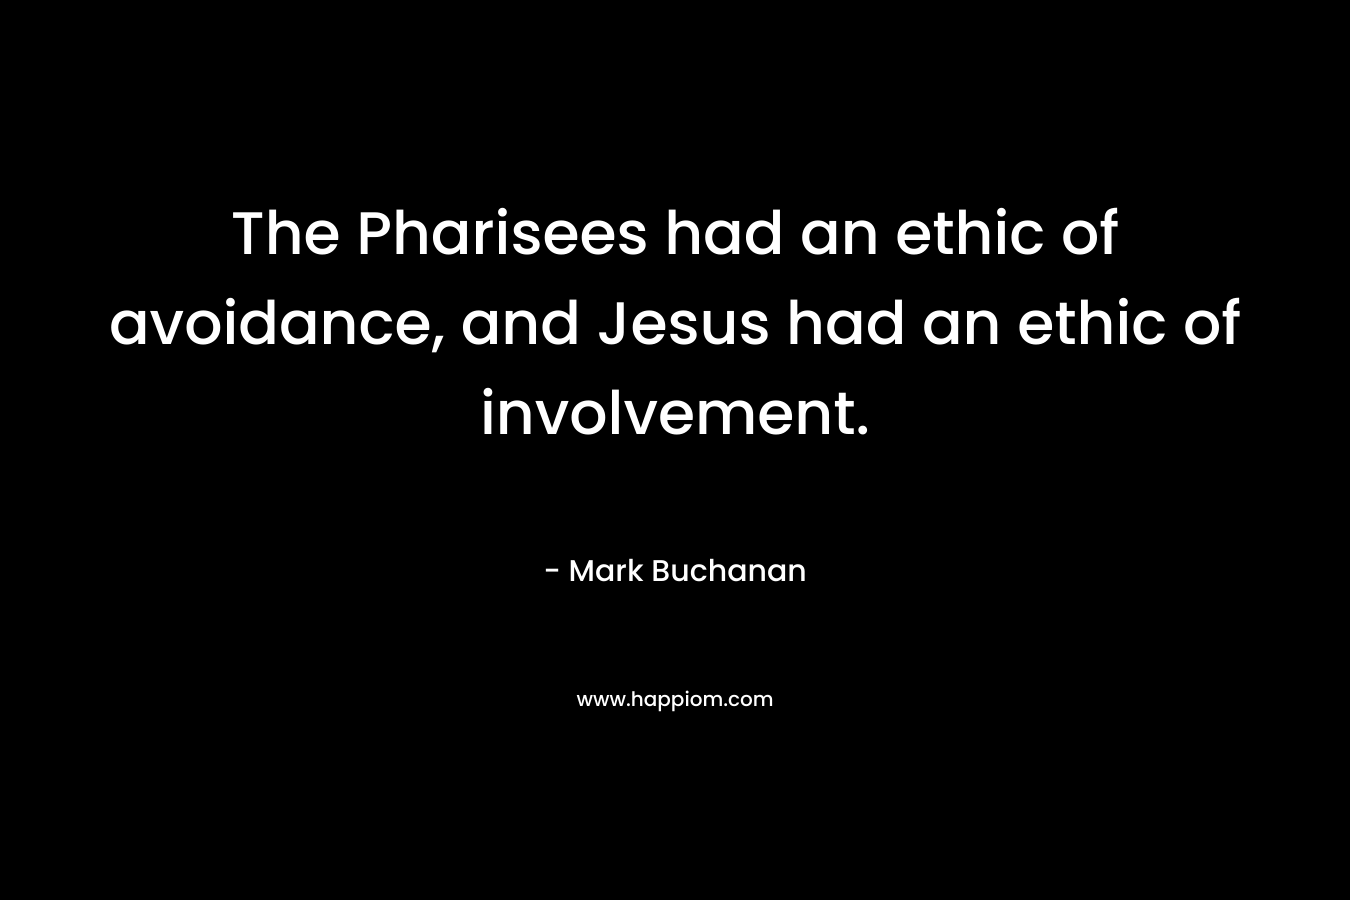 The Pharisees had an ethic of avoidance, and Jesus had an ethic of involvement.